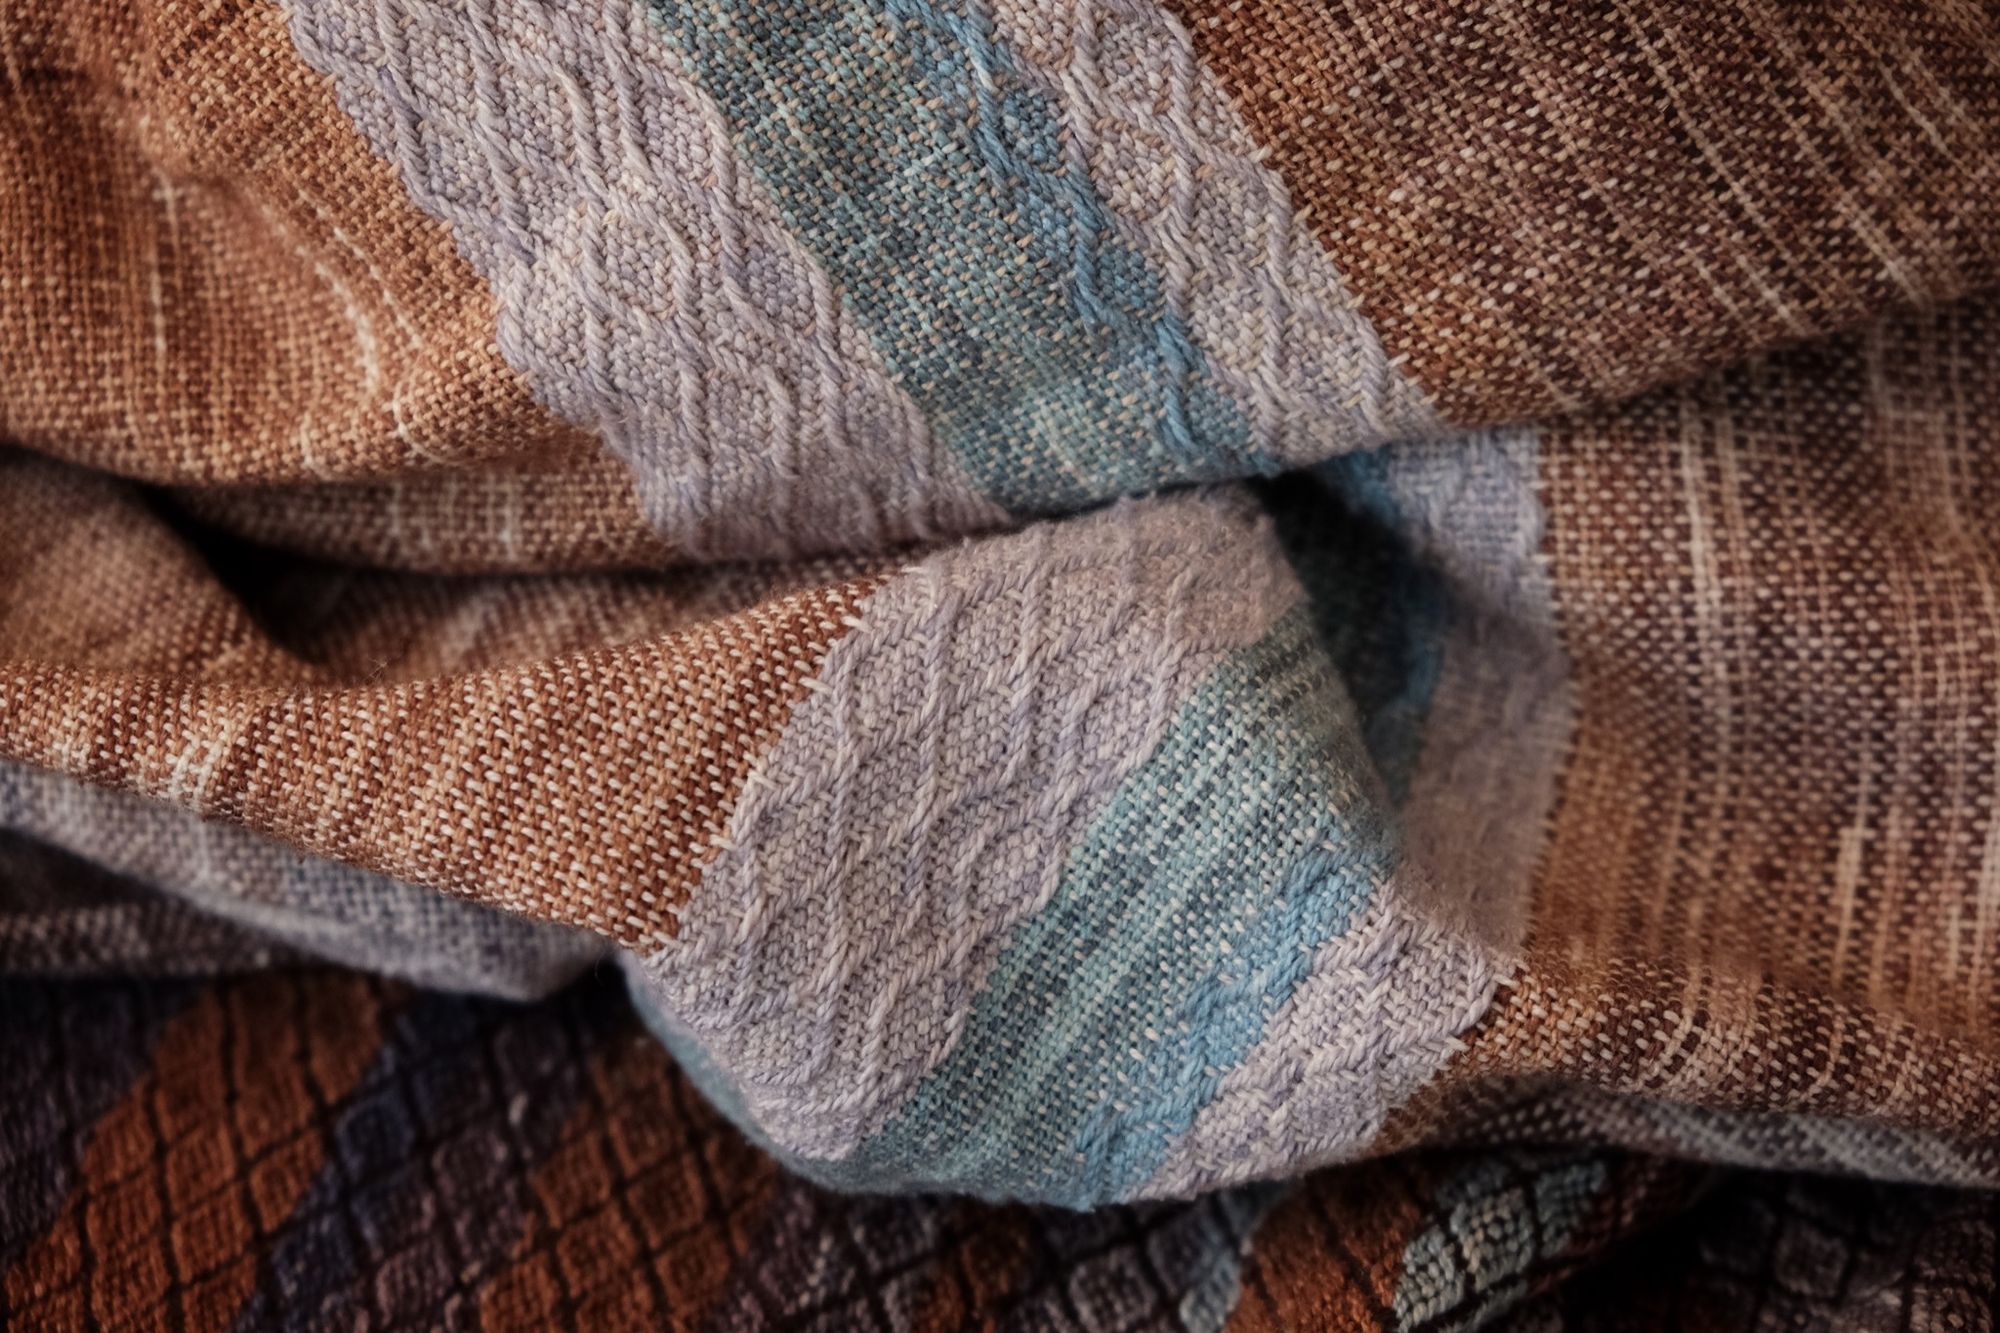 Handwoven fabric with a diamond weave pattern in shades of brown, blue and rainbow lays on a wooden floor